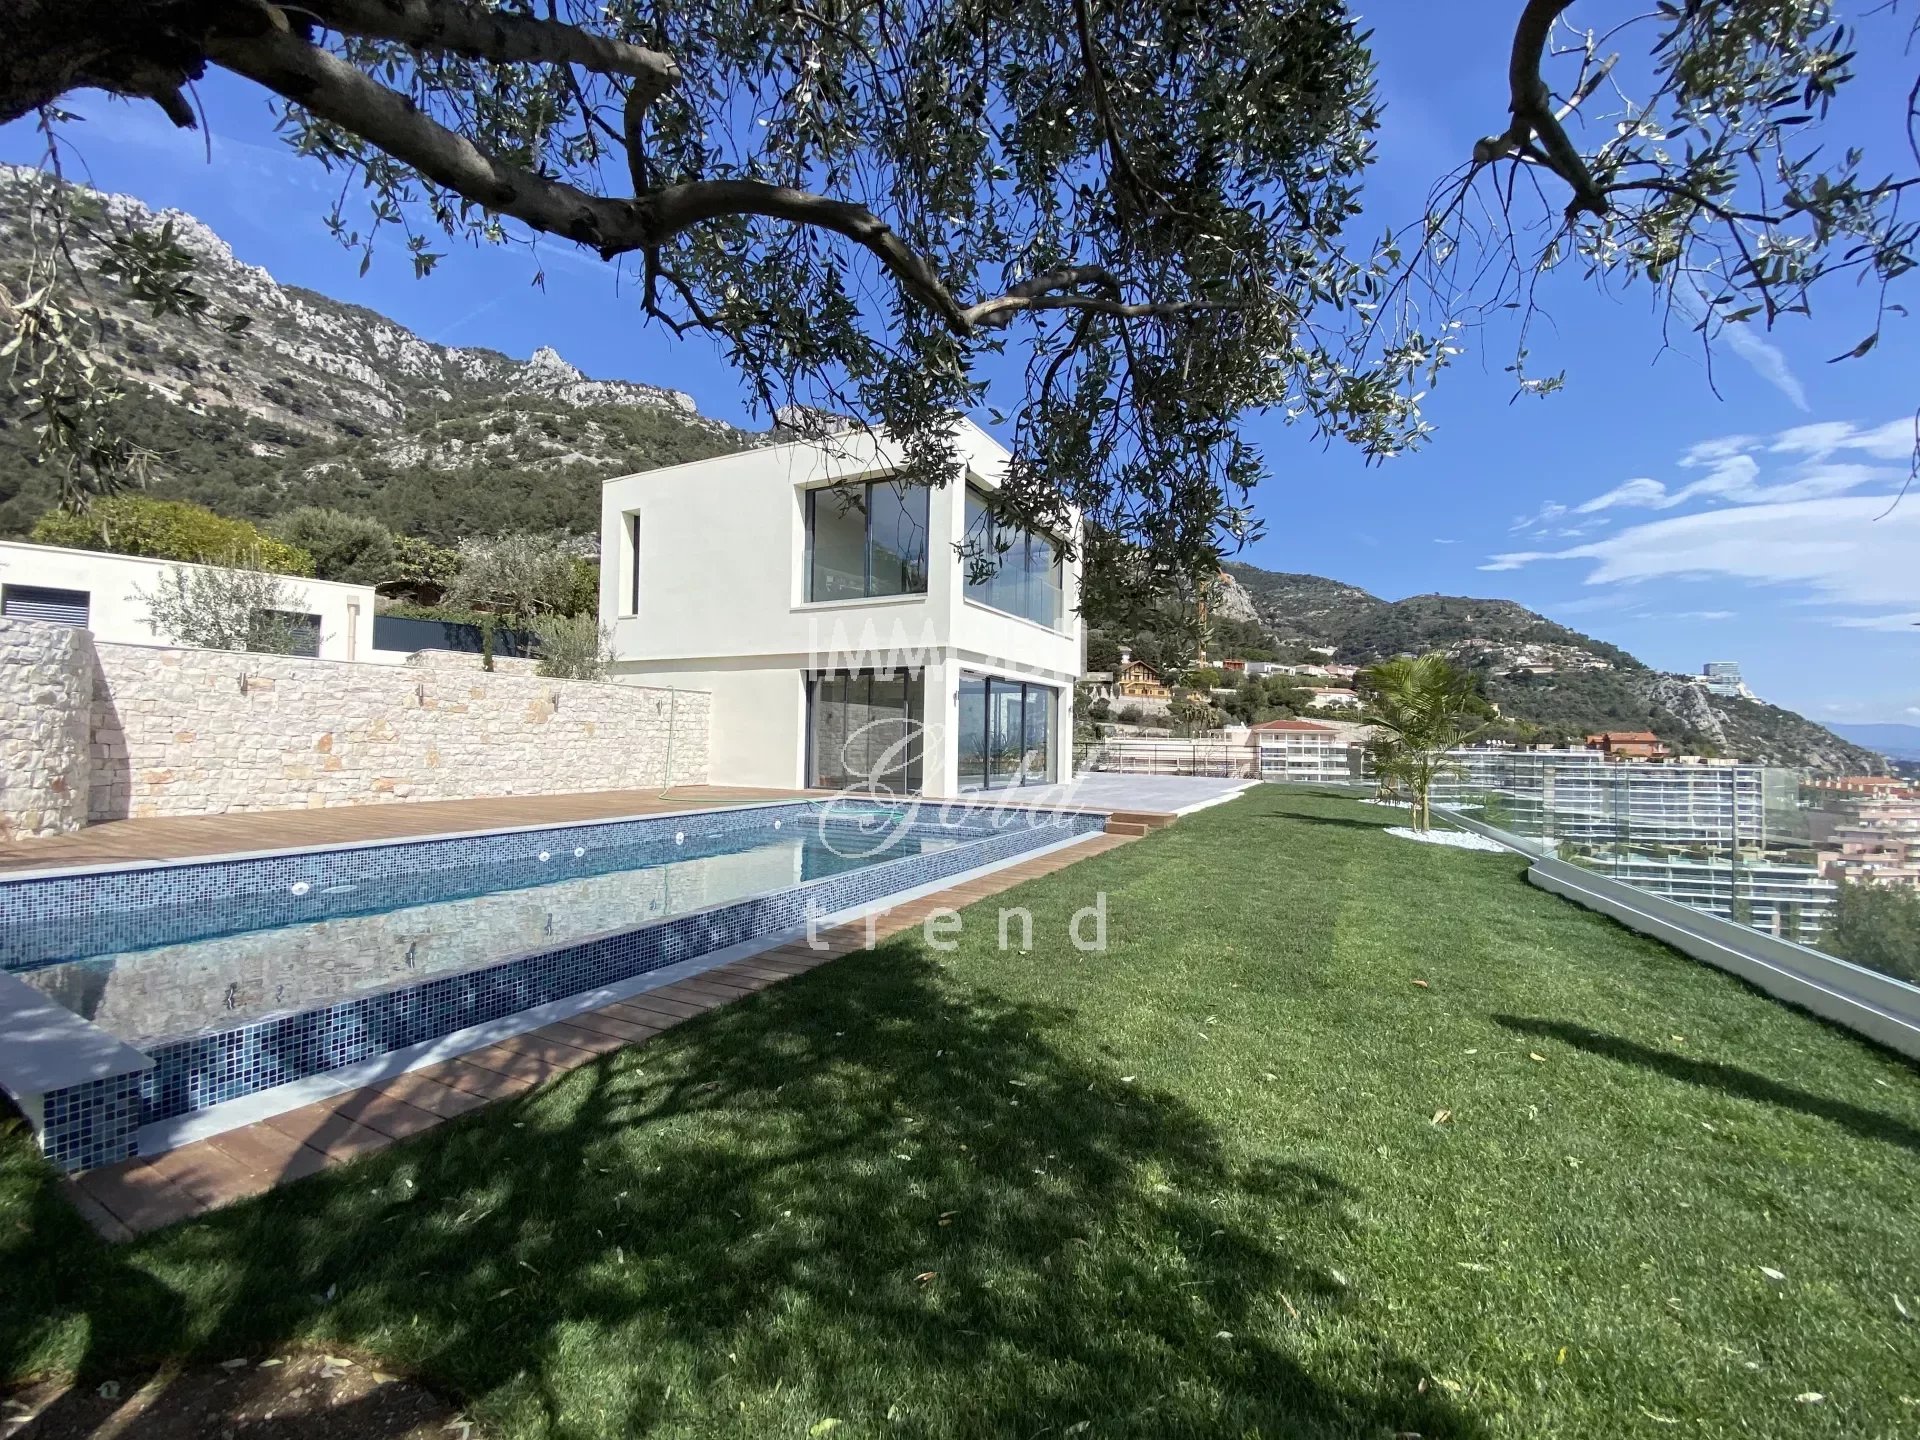 Real estate Beausoleil - For sale, wonderful villa with swimming pool and panoramic sea view, very close to Monaco